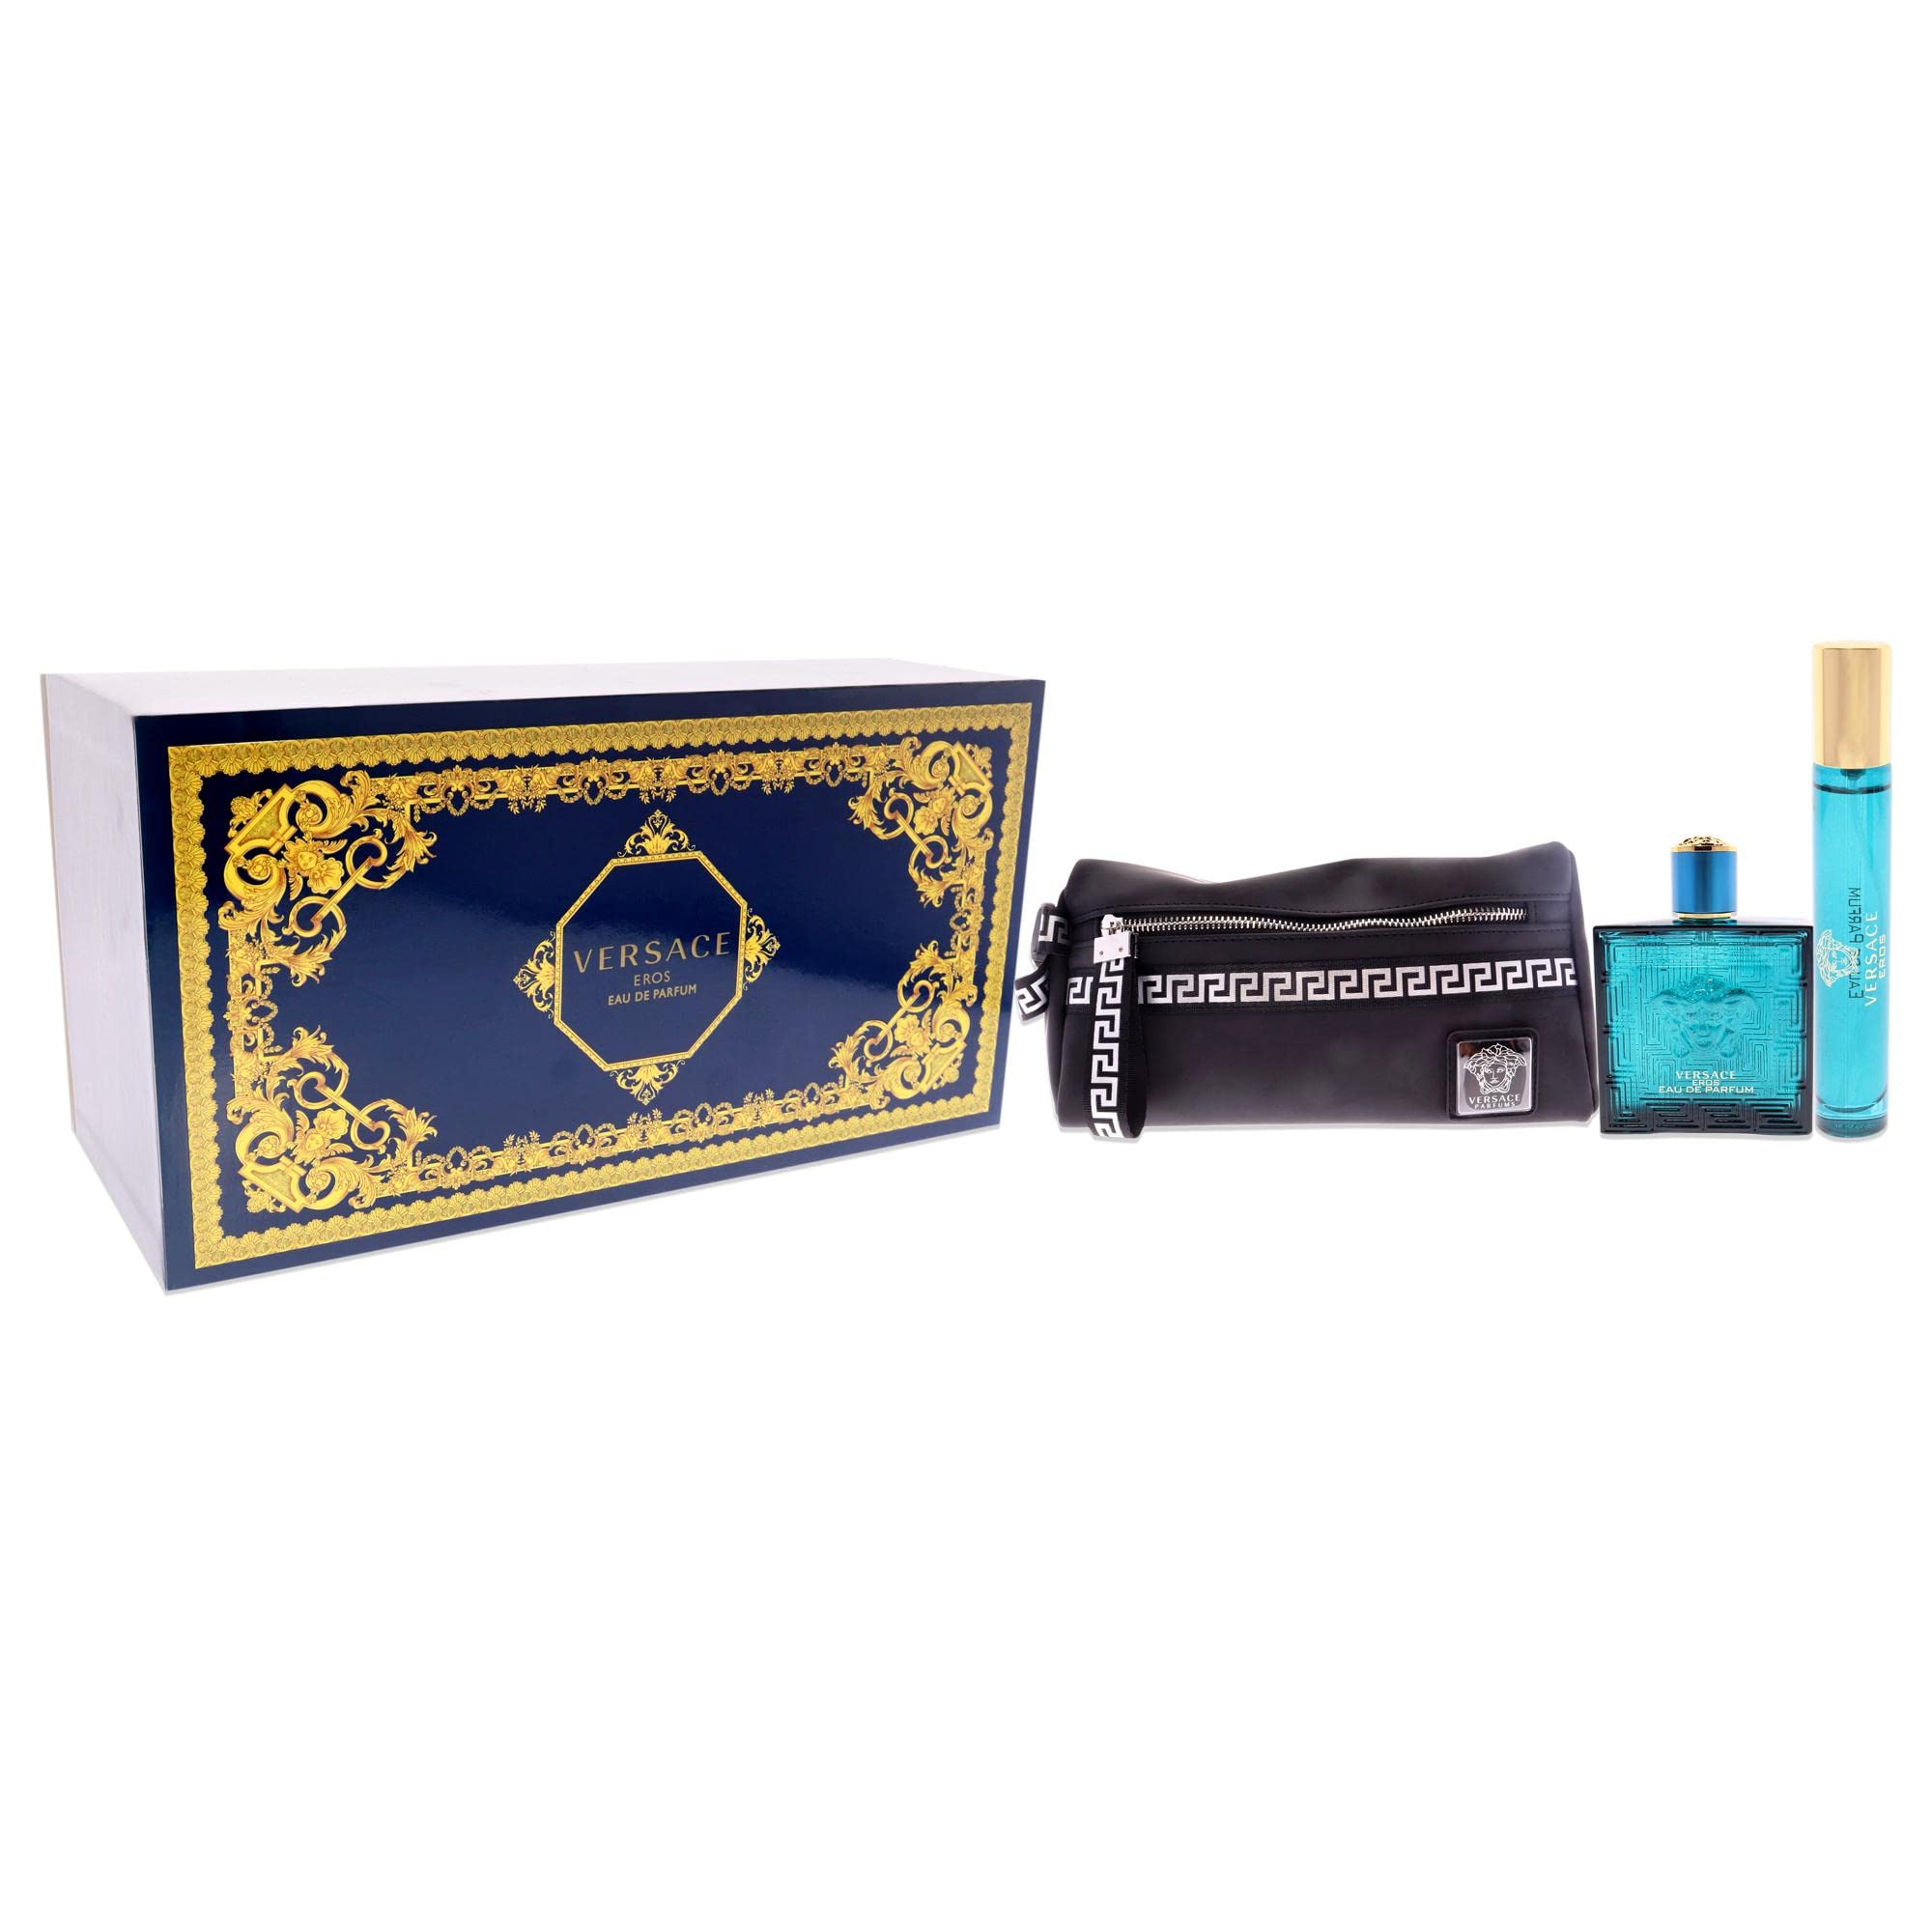 Amazon.com : Versace Eros Flame, 3count : Beauty & Personal Care